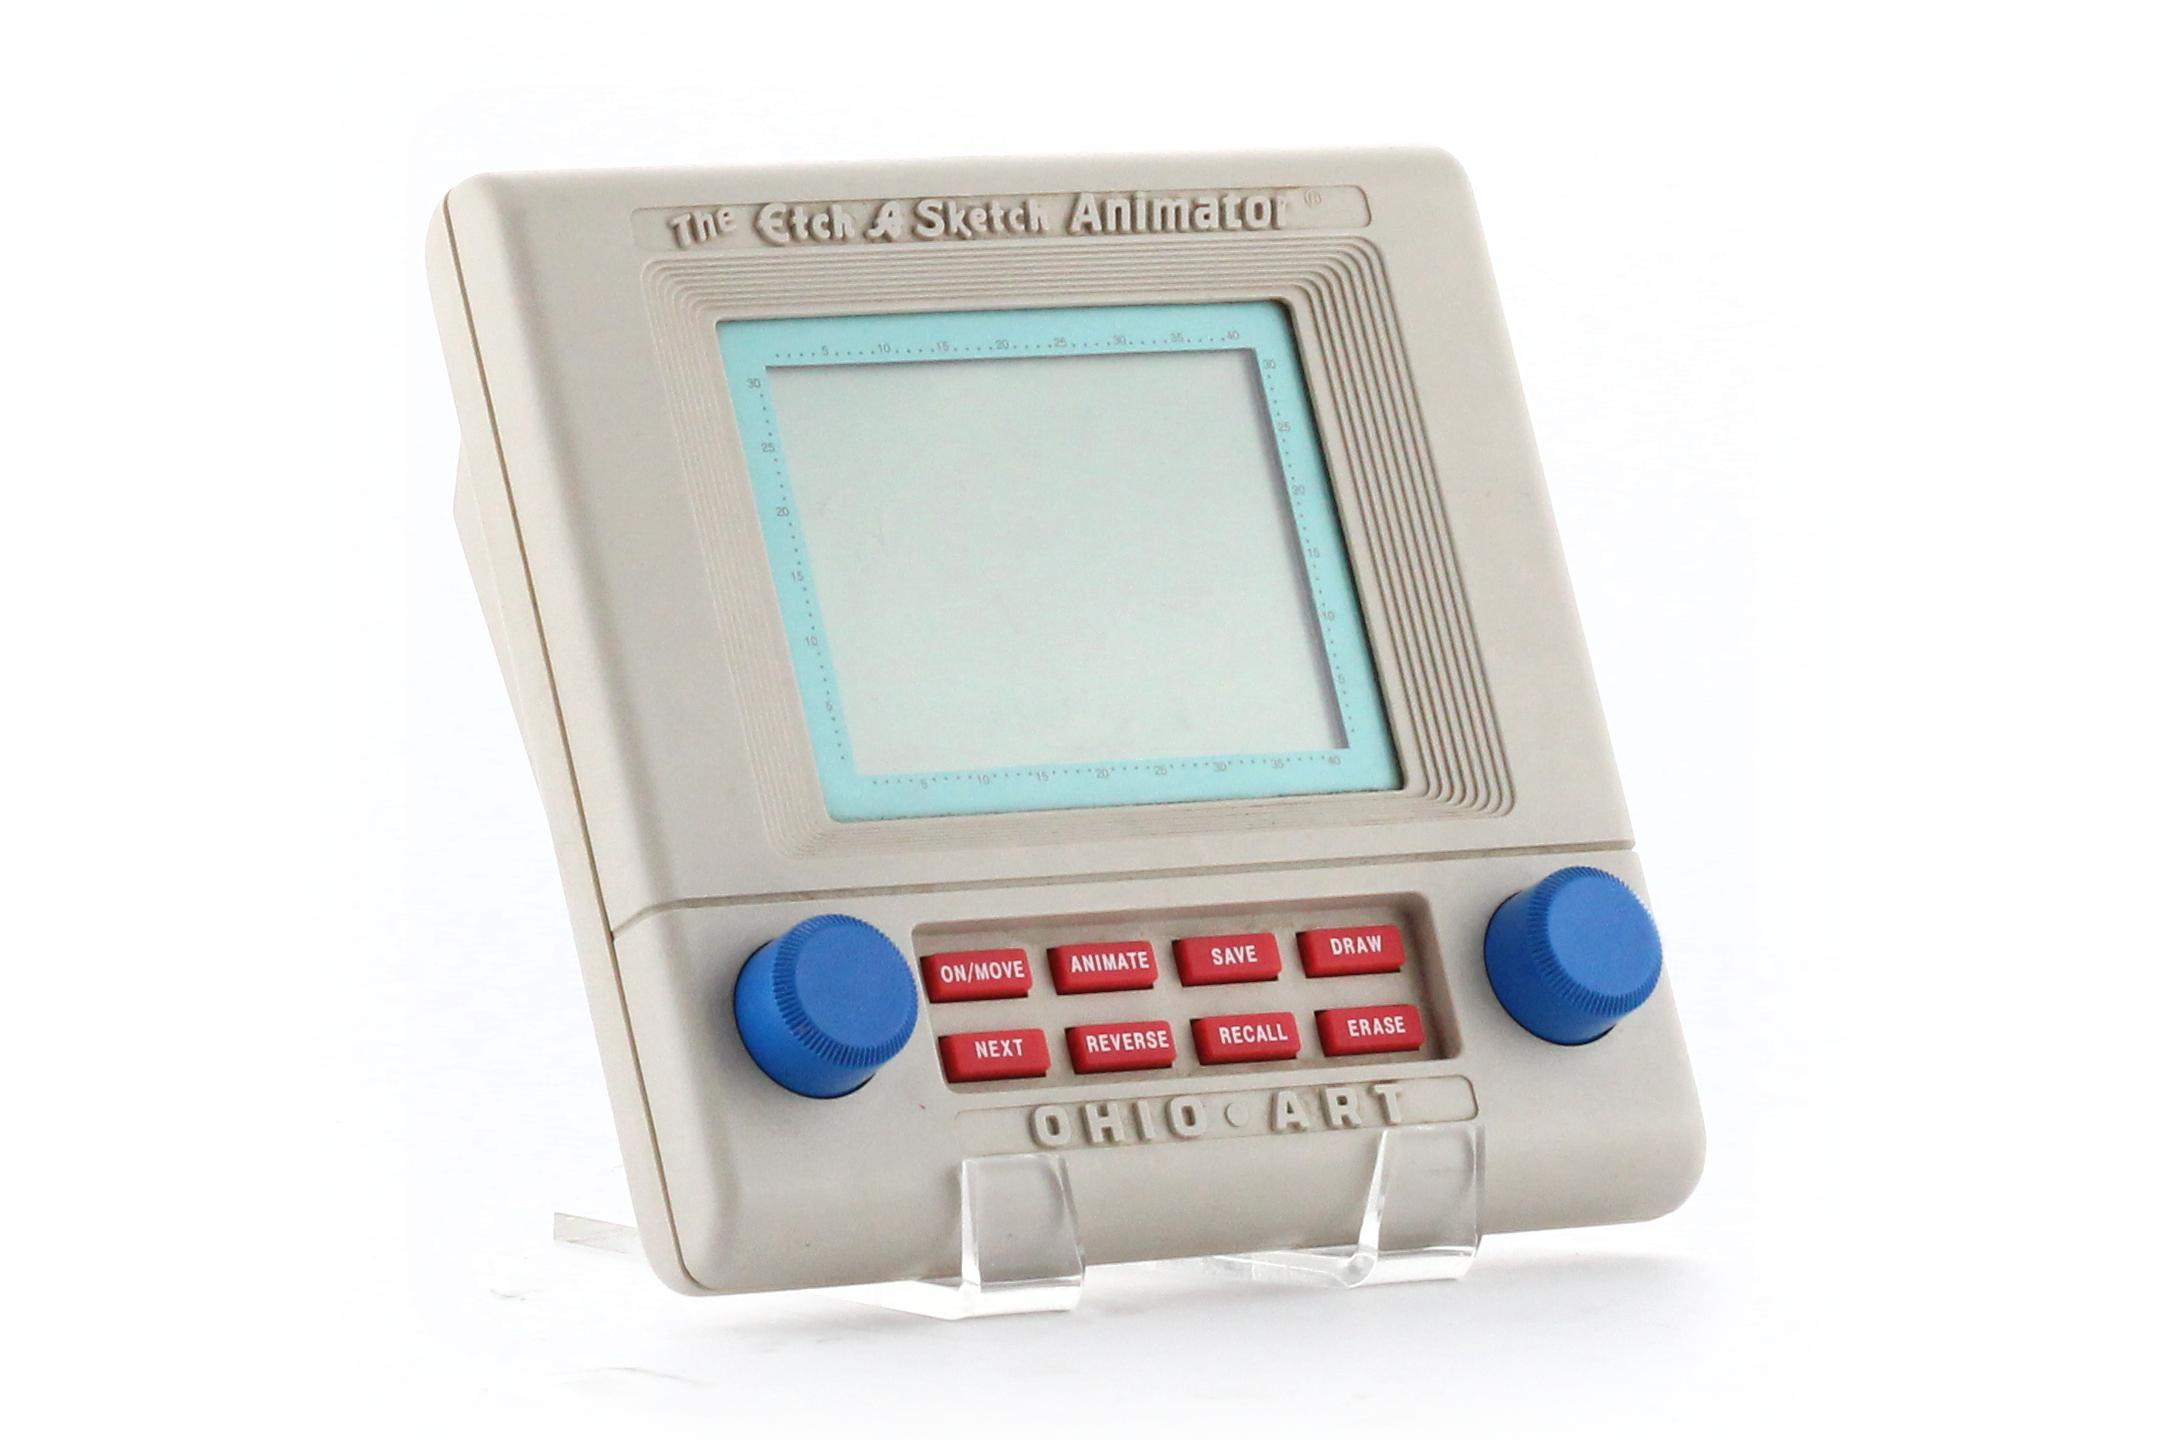 Vintage 80s The Etch A Sketch Animator Electronic Hand-Held LCD Game by  Ohio Art | #1841178410